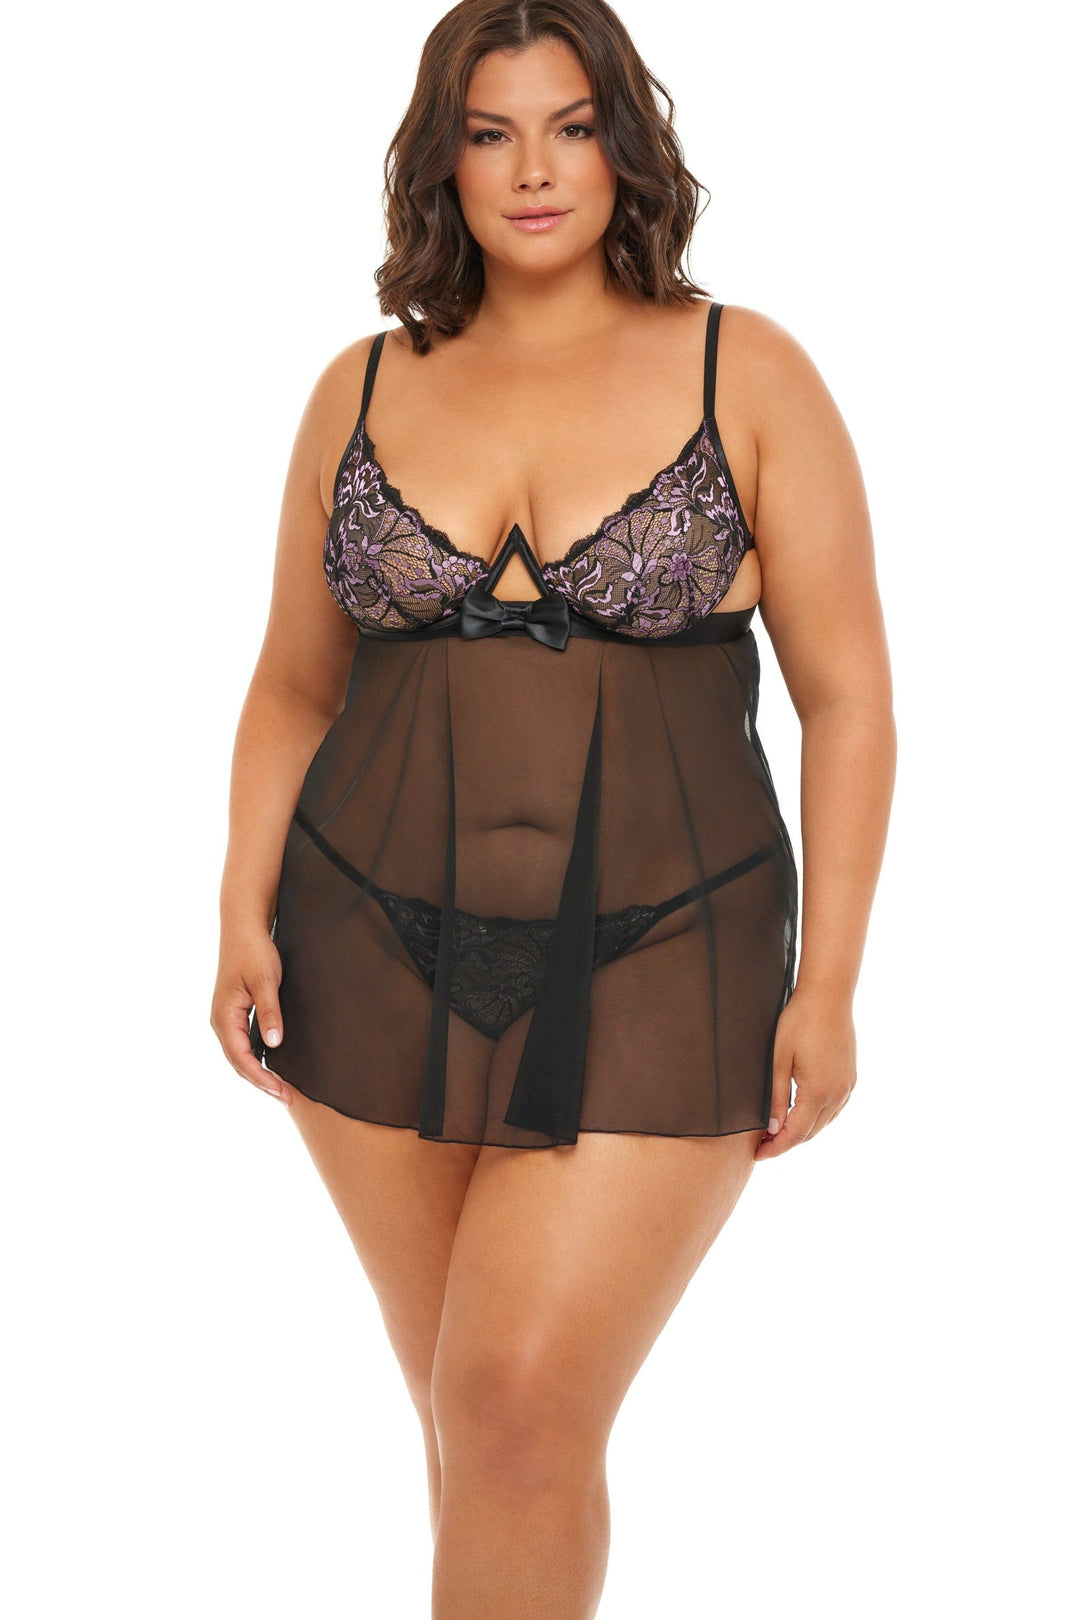 Empire Waist Babydoll With Bow Details And Matching G-String-Babydolls-Oh La La Cheri-Black-1/2XL-SEXYSHOES.COM